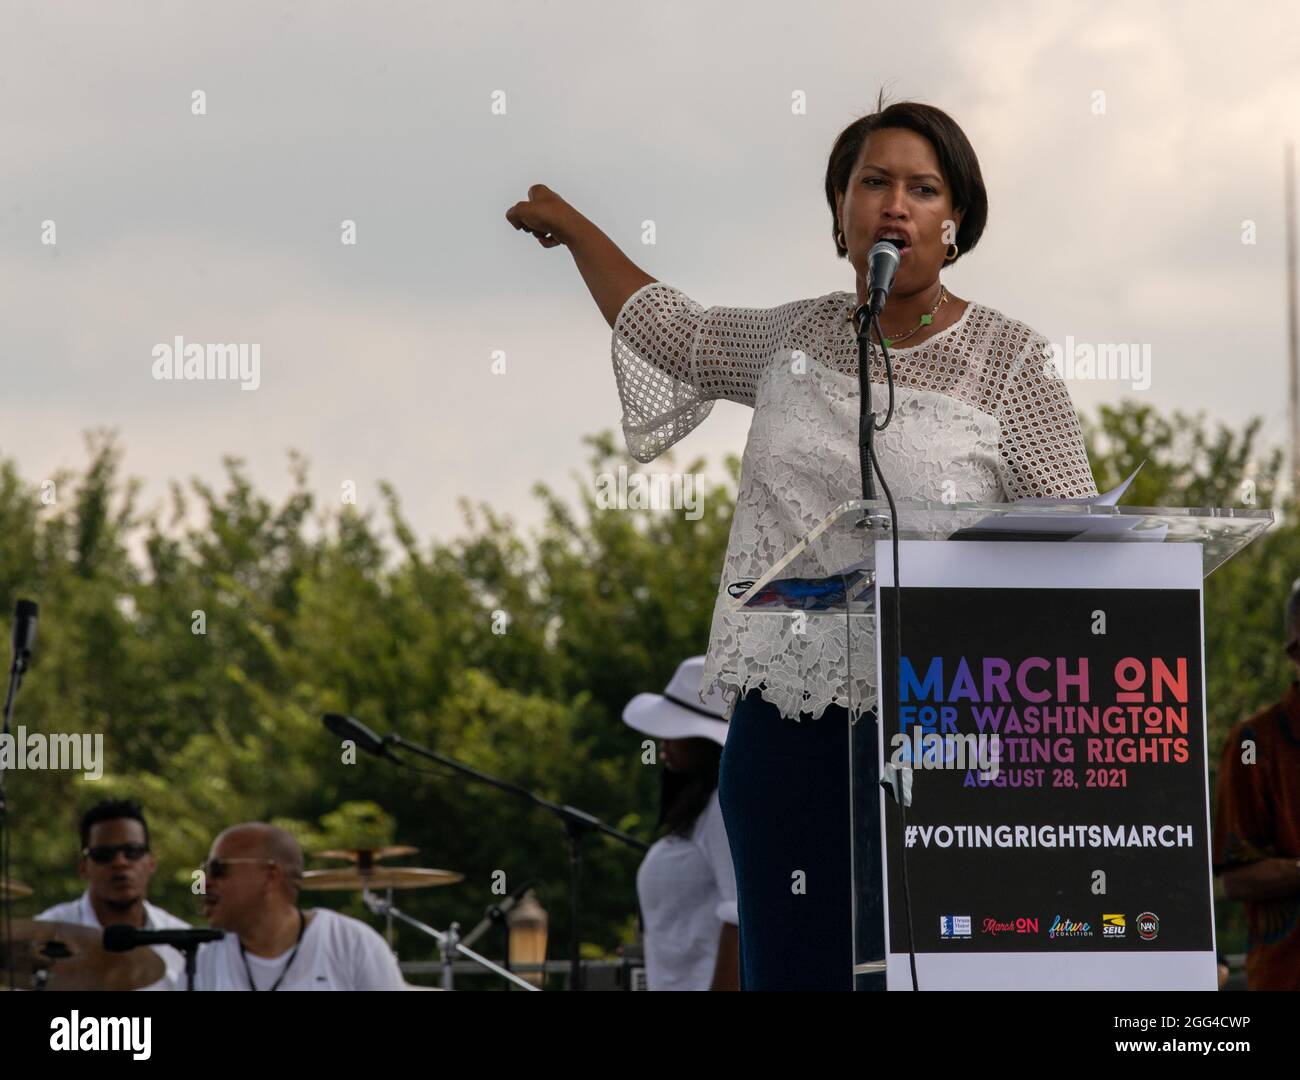 Washington, USA. 26th Aug, 2021. District of Columbia Mayor Muriel Bowser speaks at the National Action Network's March On For Voting Rights event in Washington, DC on August 28, 2021. The march, which brought thousands to Washington, called for the protection of the voting rights of Black Americans and took place on the 58th anniversary of Dr. Martin Luther King, Jr.'s "I Have a Dream" speech. (Photo by Matthew Rodier/Sipa USA) Credit: Sipa USA/Alamy Live News Stock Photo